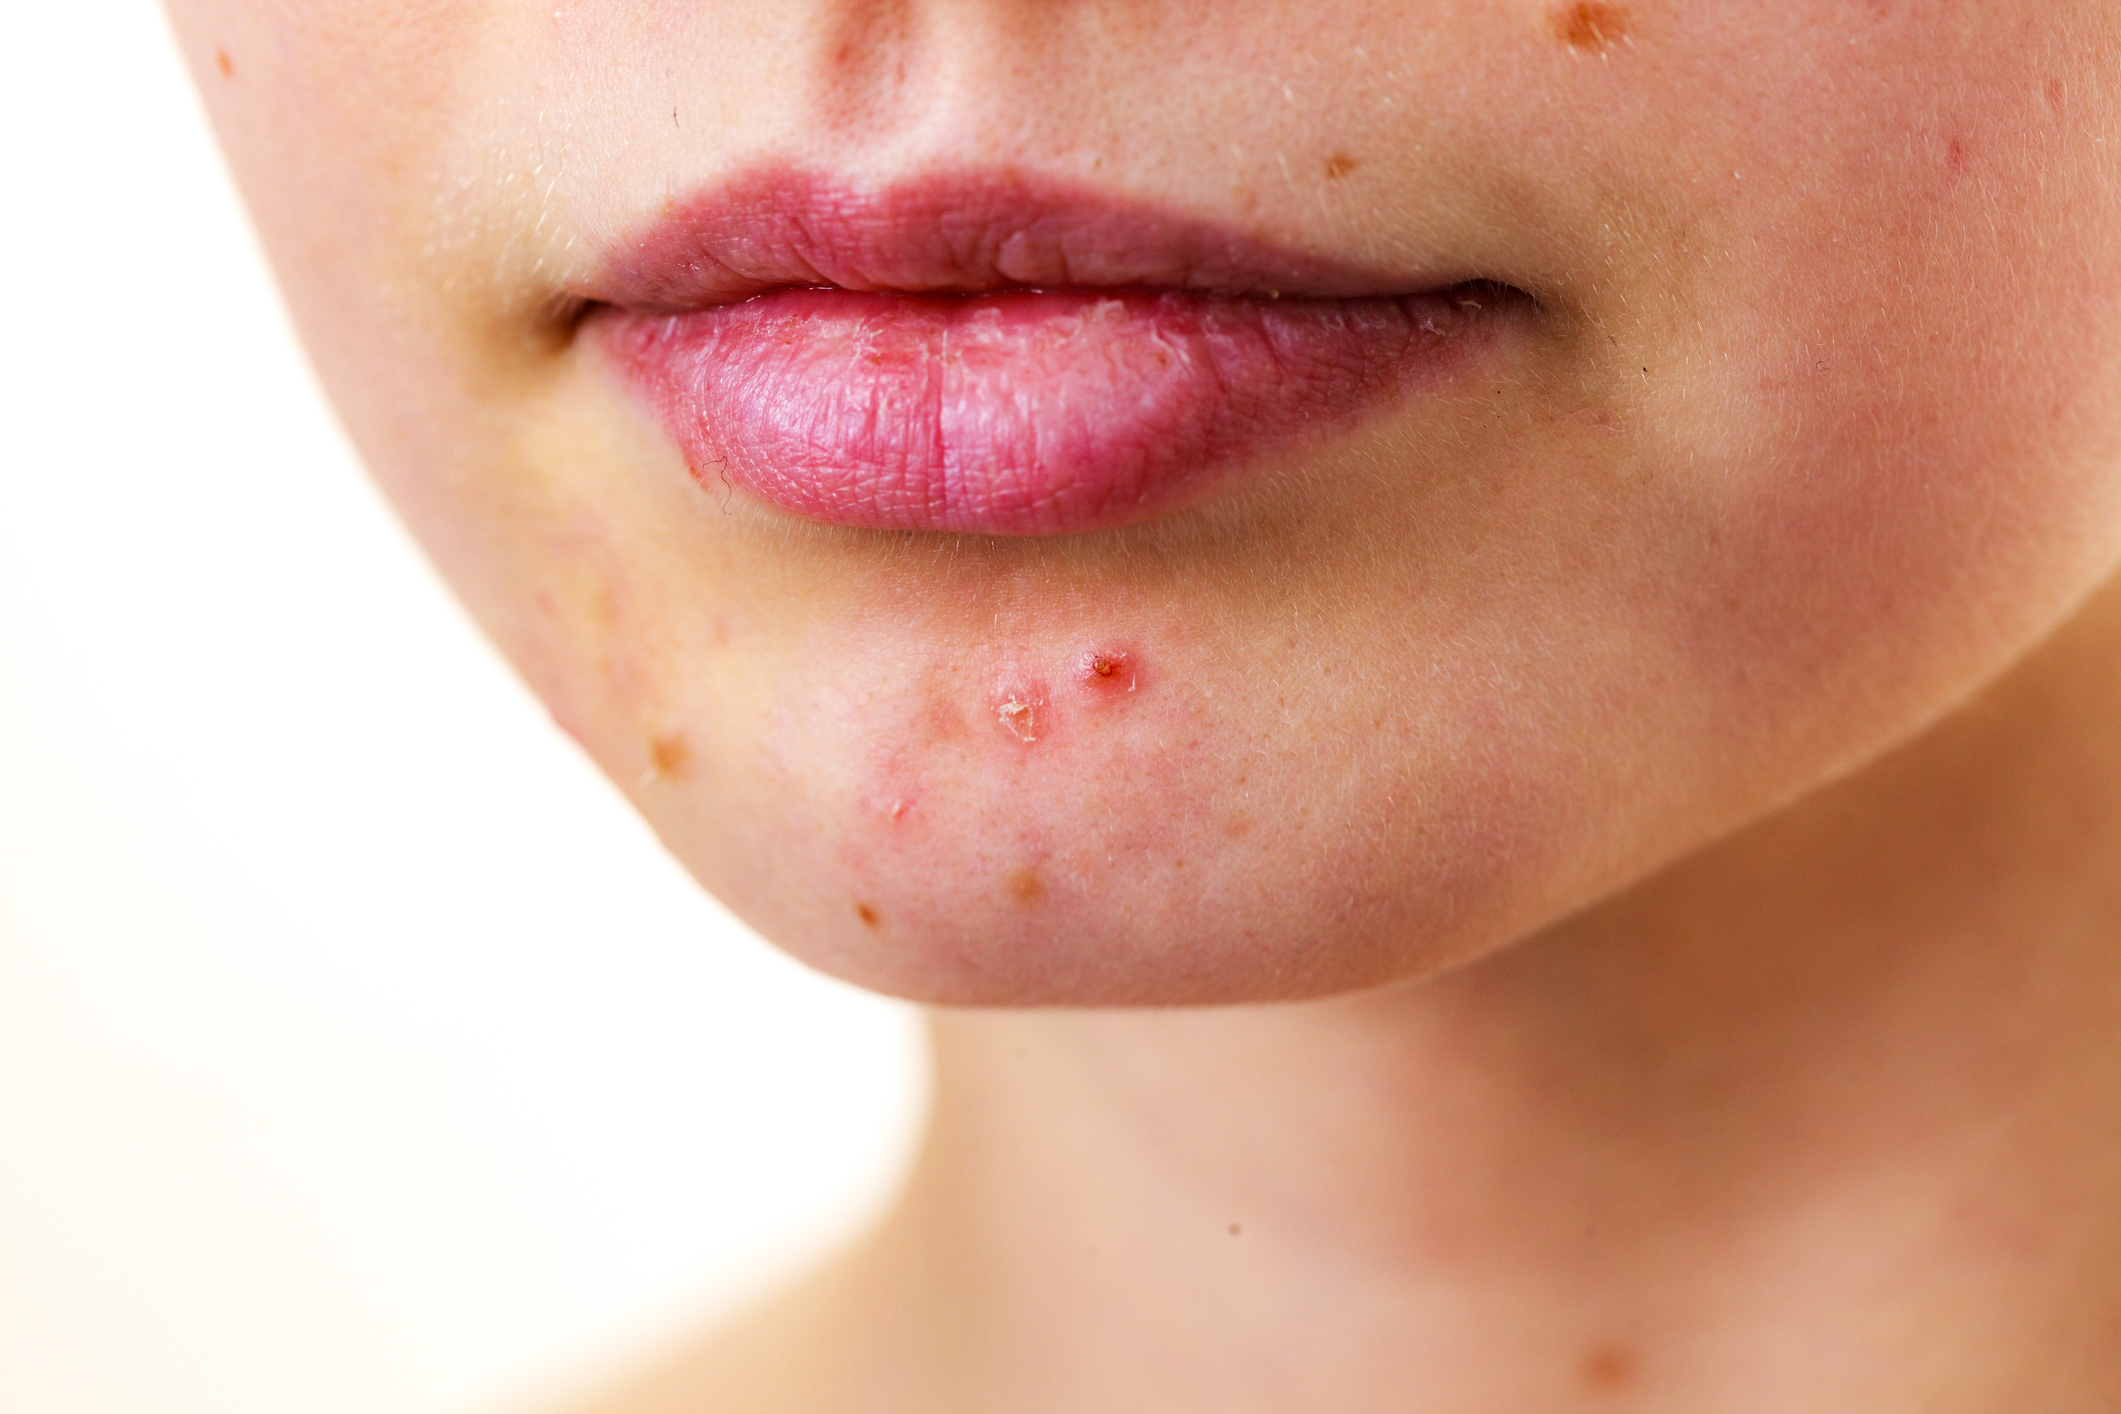 Acne on the chin of a woman - a close look.